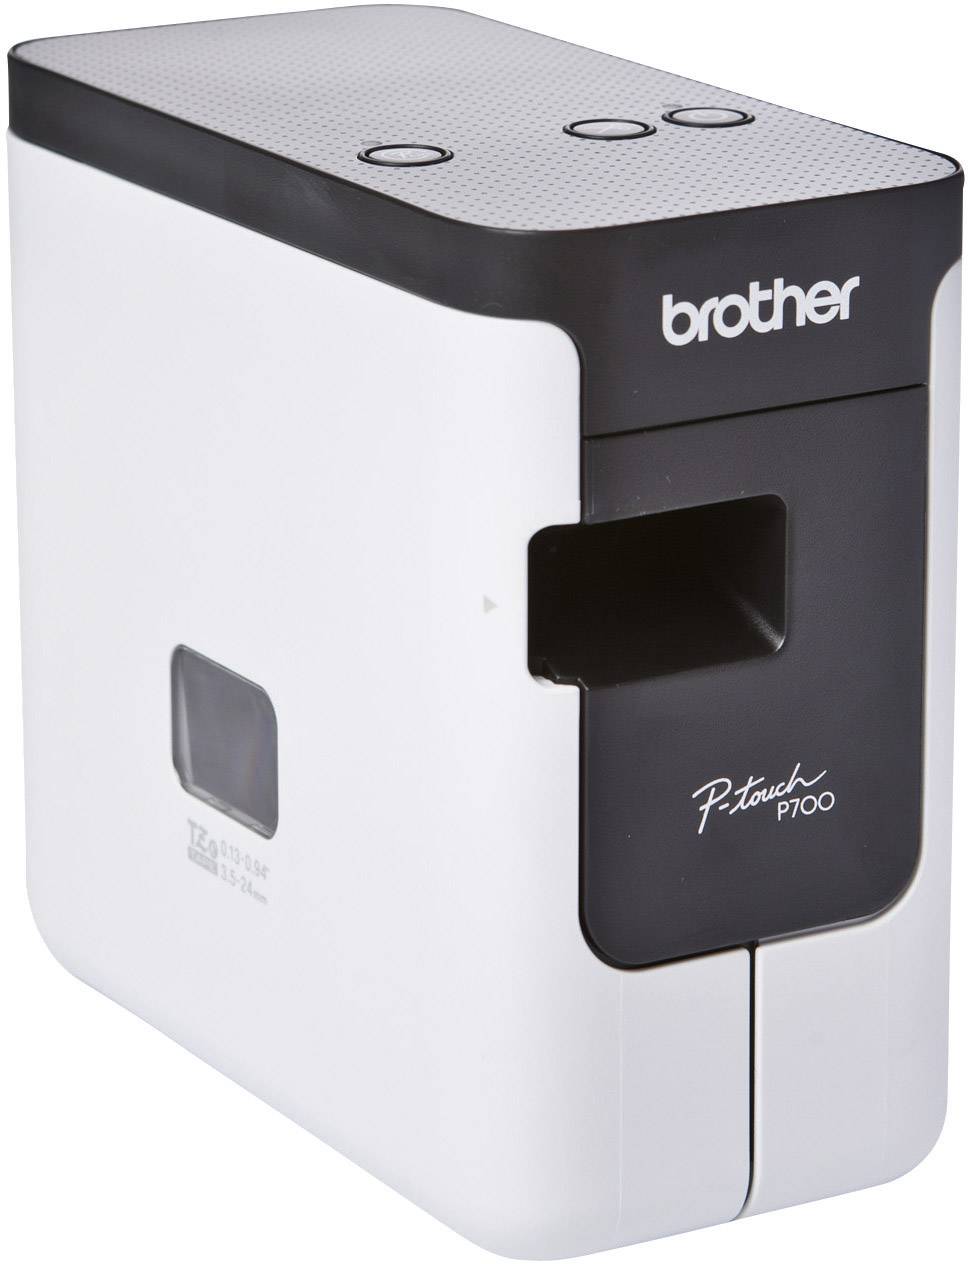 Brother P-touch P700 Label printer Suitable for scrolls: TZe, HSe 3.5 mm, 6 mm, mm, 12 mm, 18 mm, 24 mm | Conrad.com